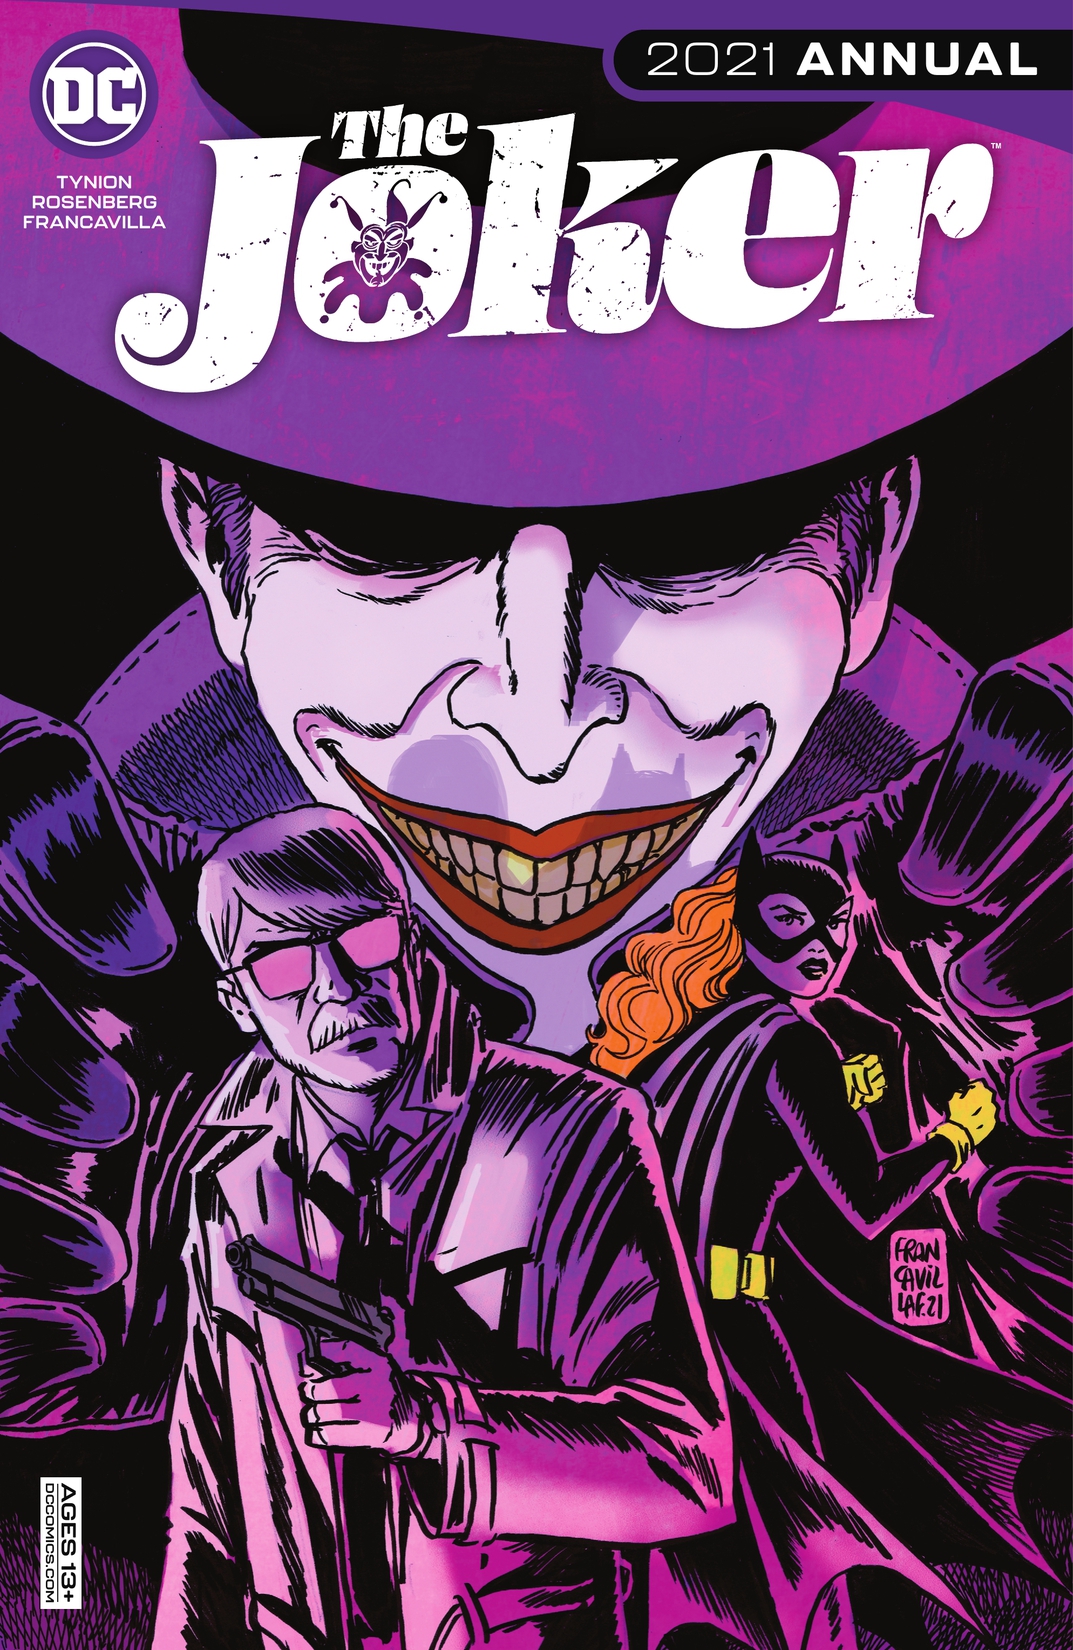 The Joker 2021 Annual #1 preview images